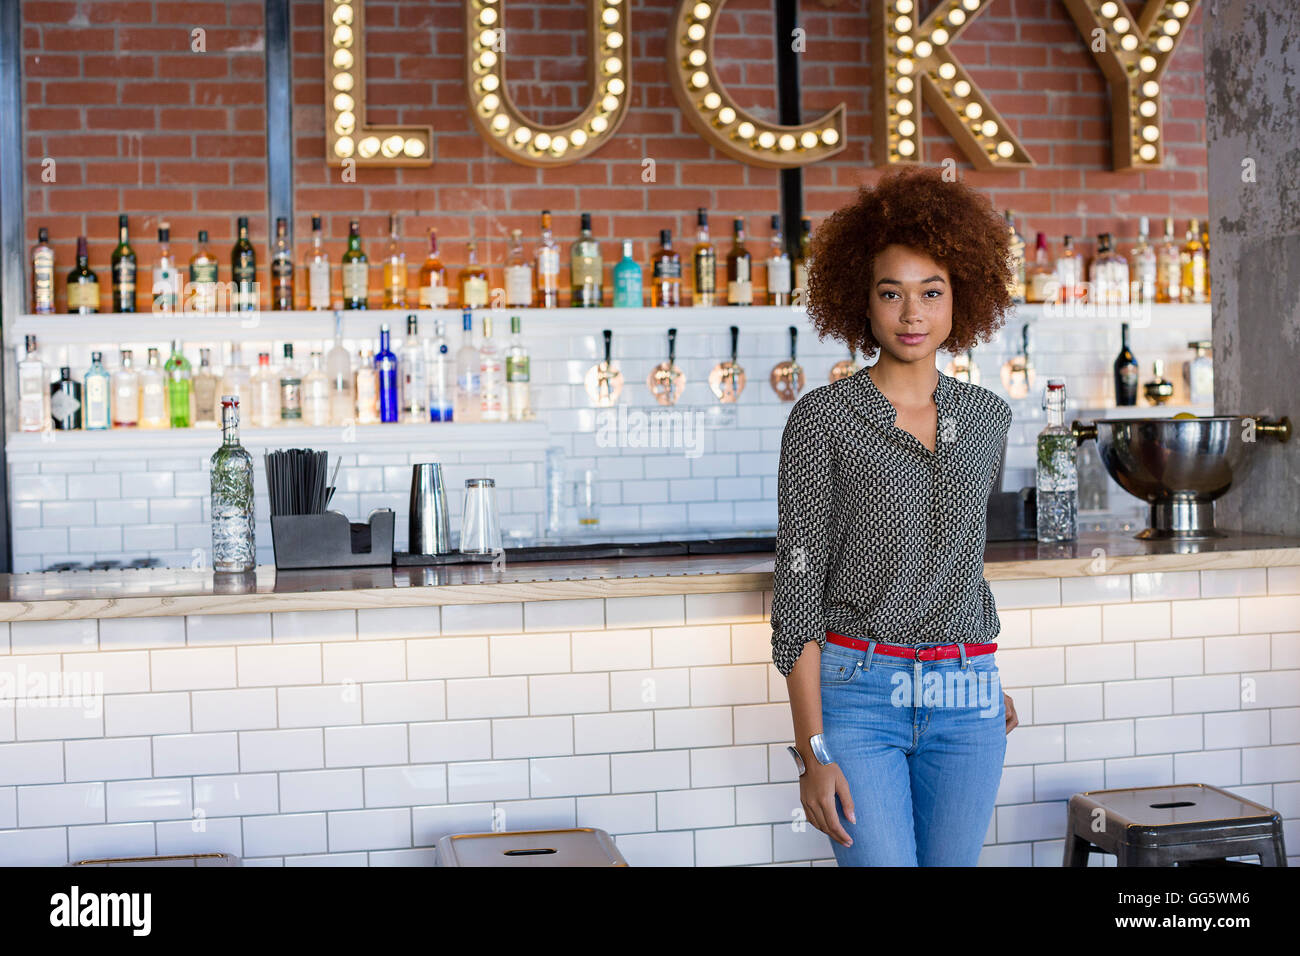 Portrait of a young woman standing at bar counter Banque D'Images